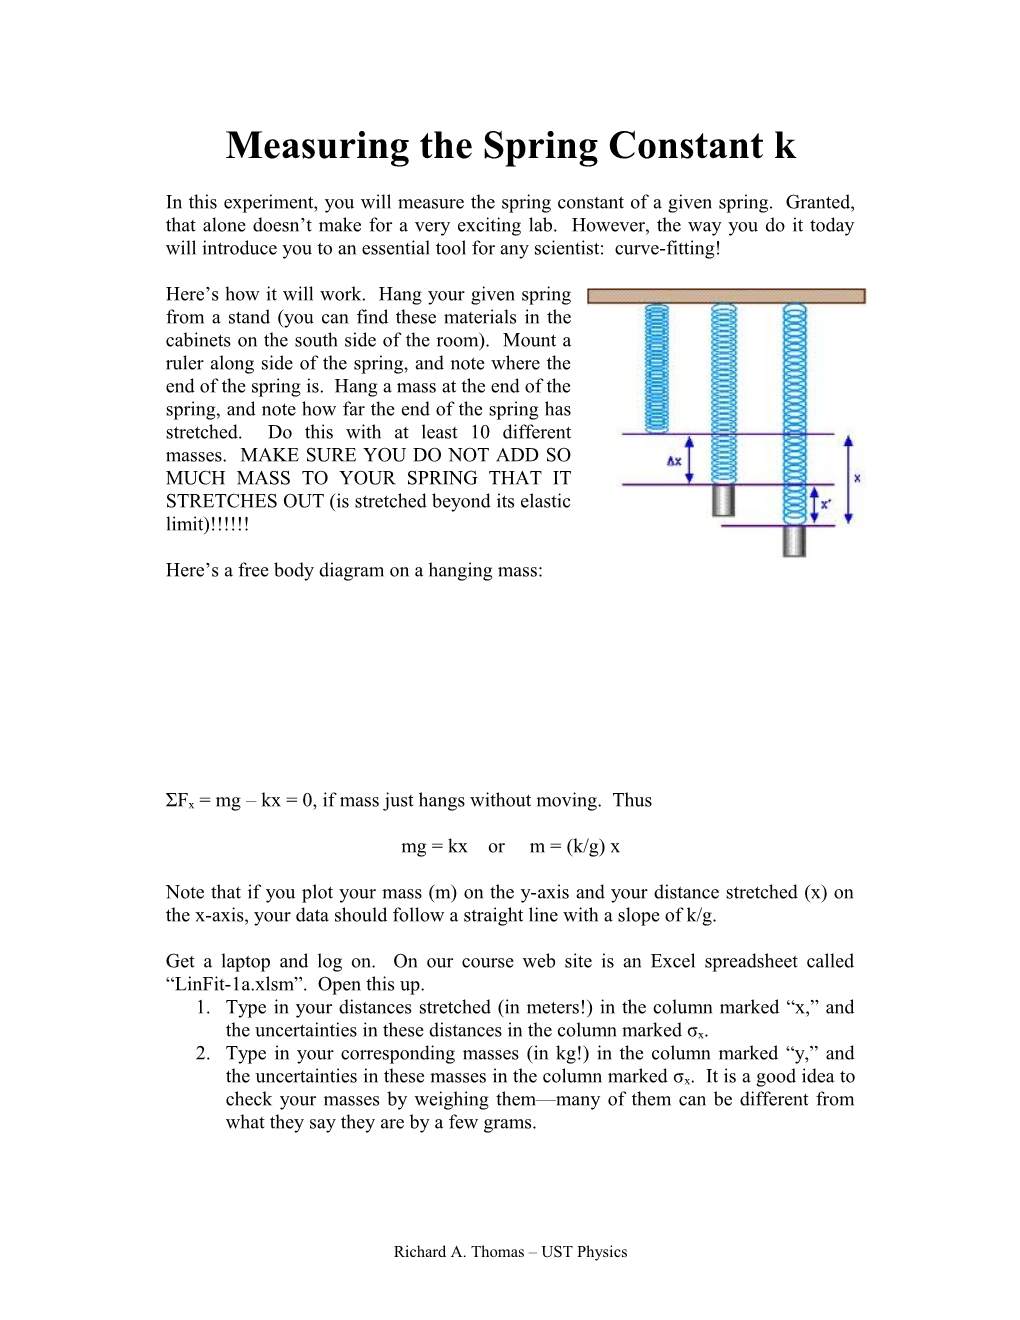 Measuring the Spring Constant K